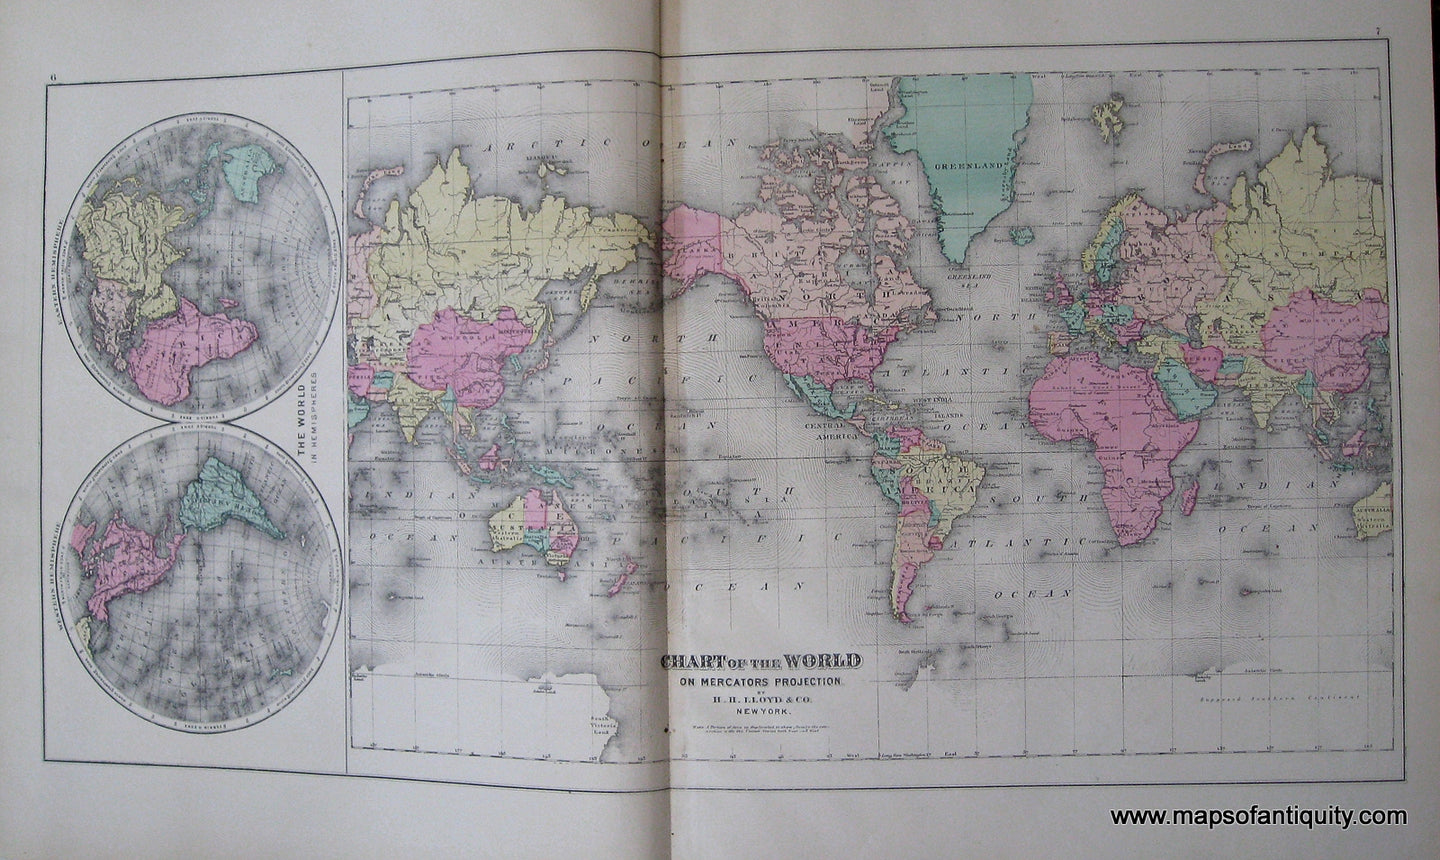 Antique-Map-Chart-of-the-World-on-Mercator's-Projection-by-H.H.-Lloyd-&-Co.